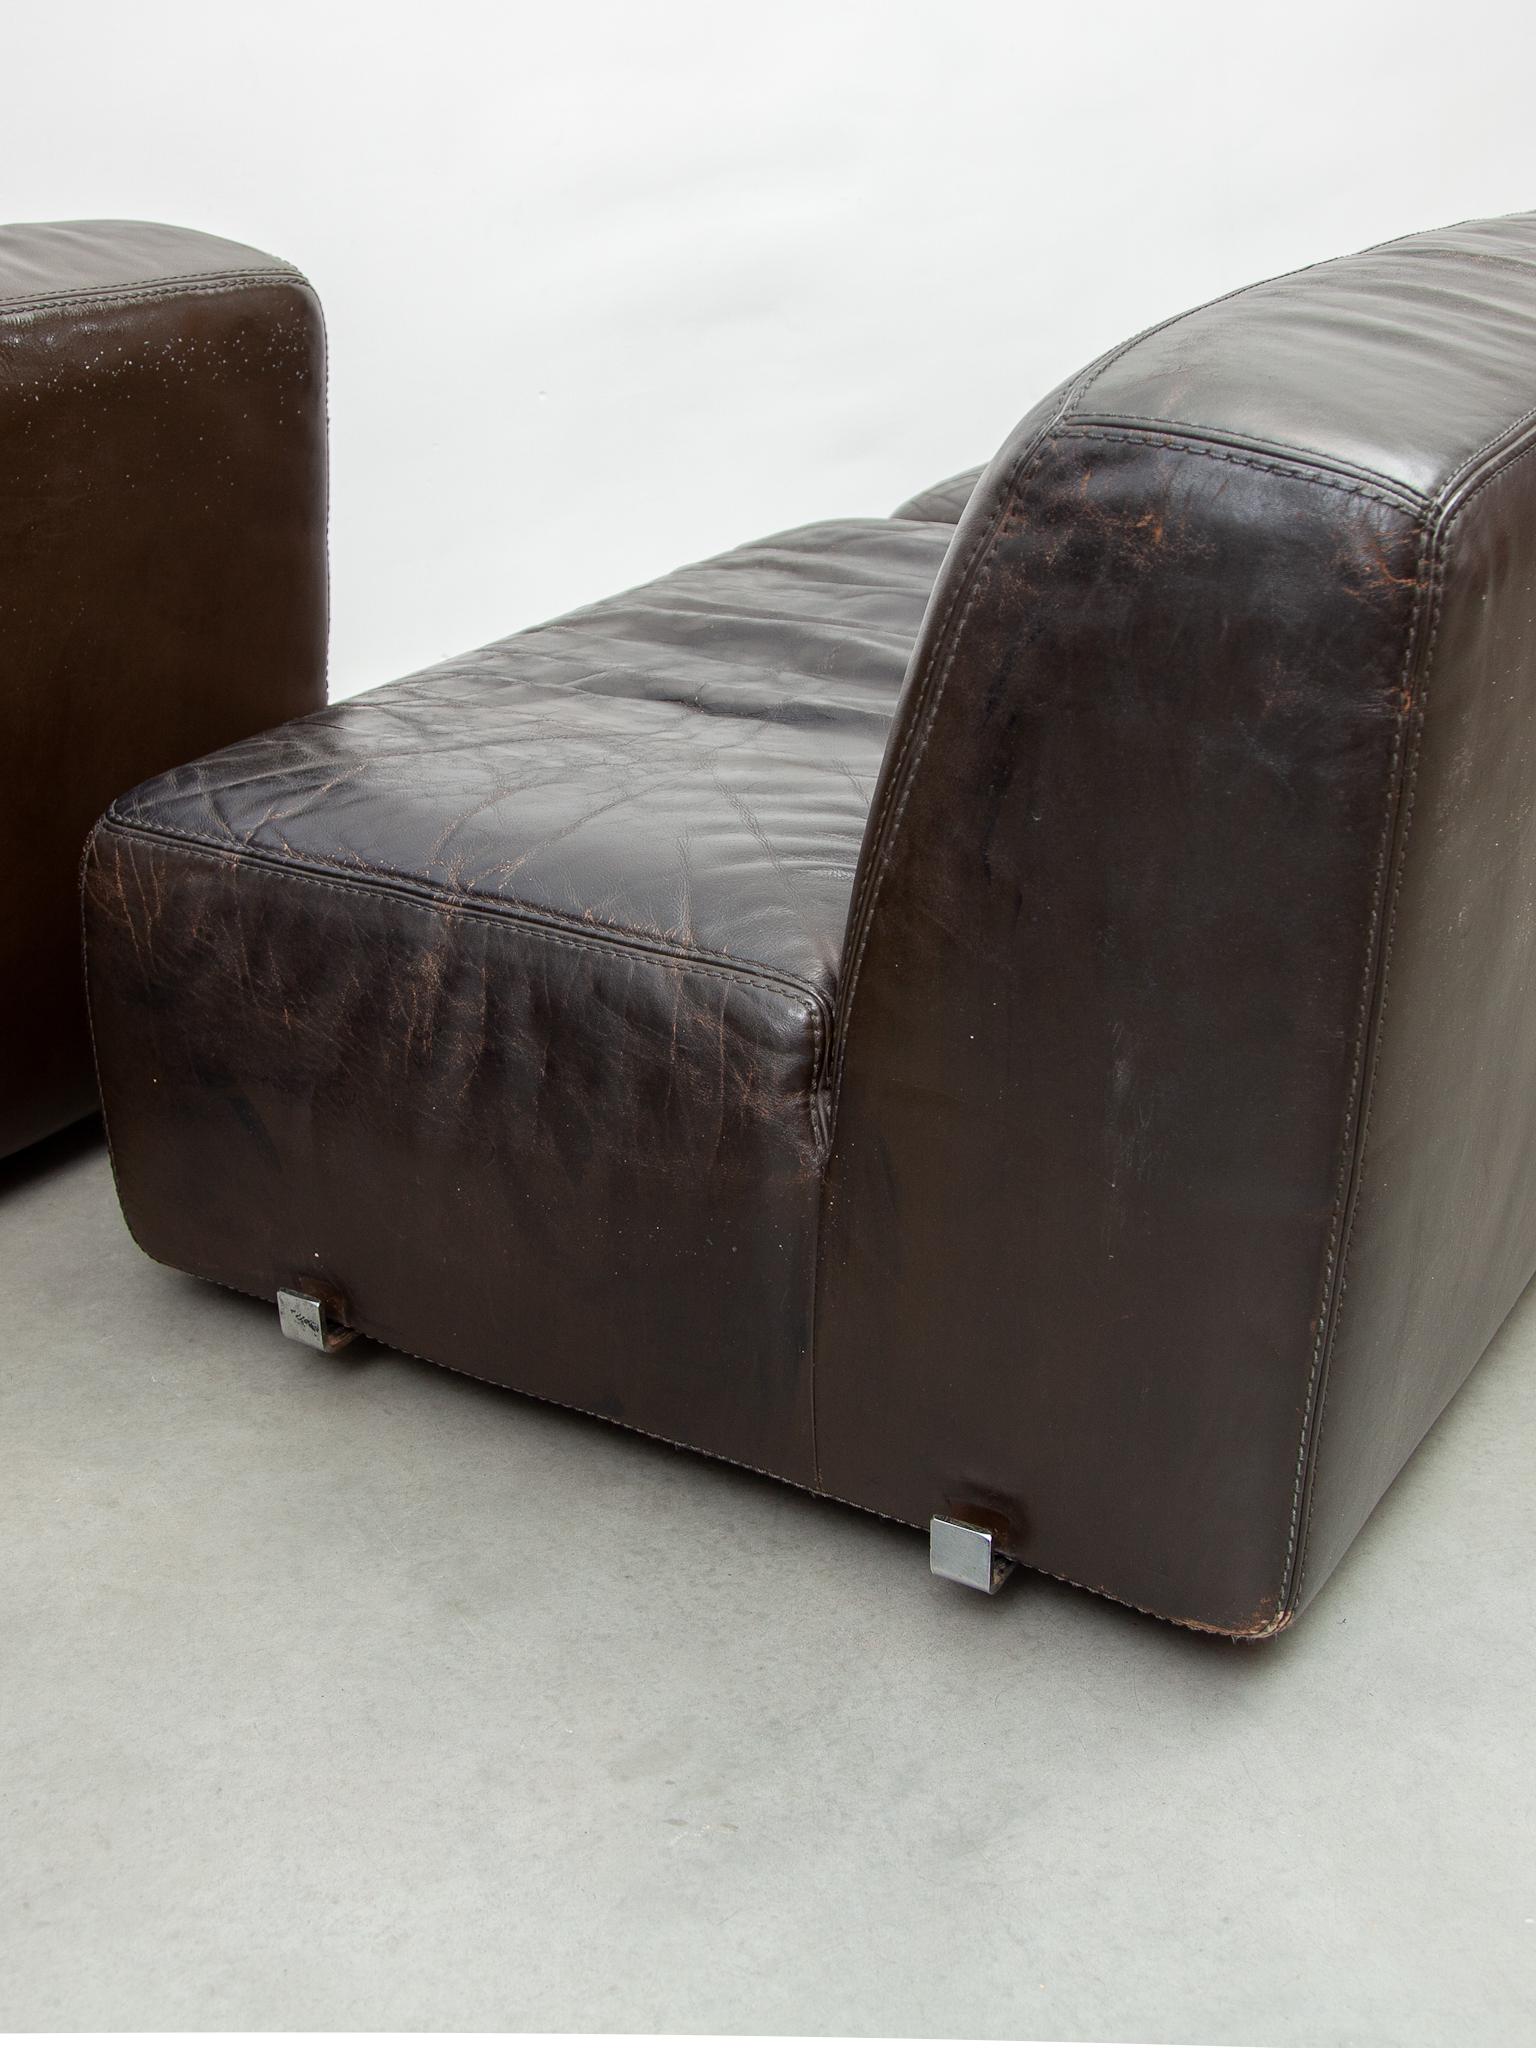 Modular Sofa 1970s Brown Leather designed by Durlet For Sale 4